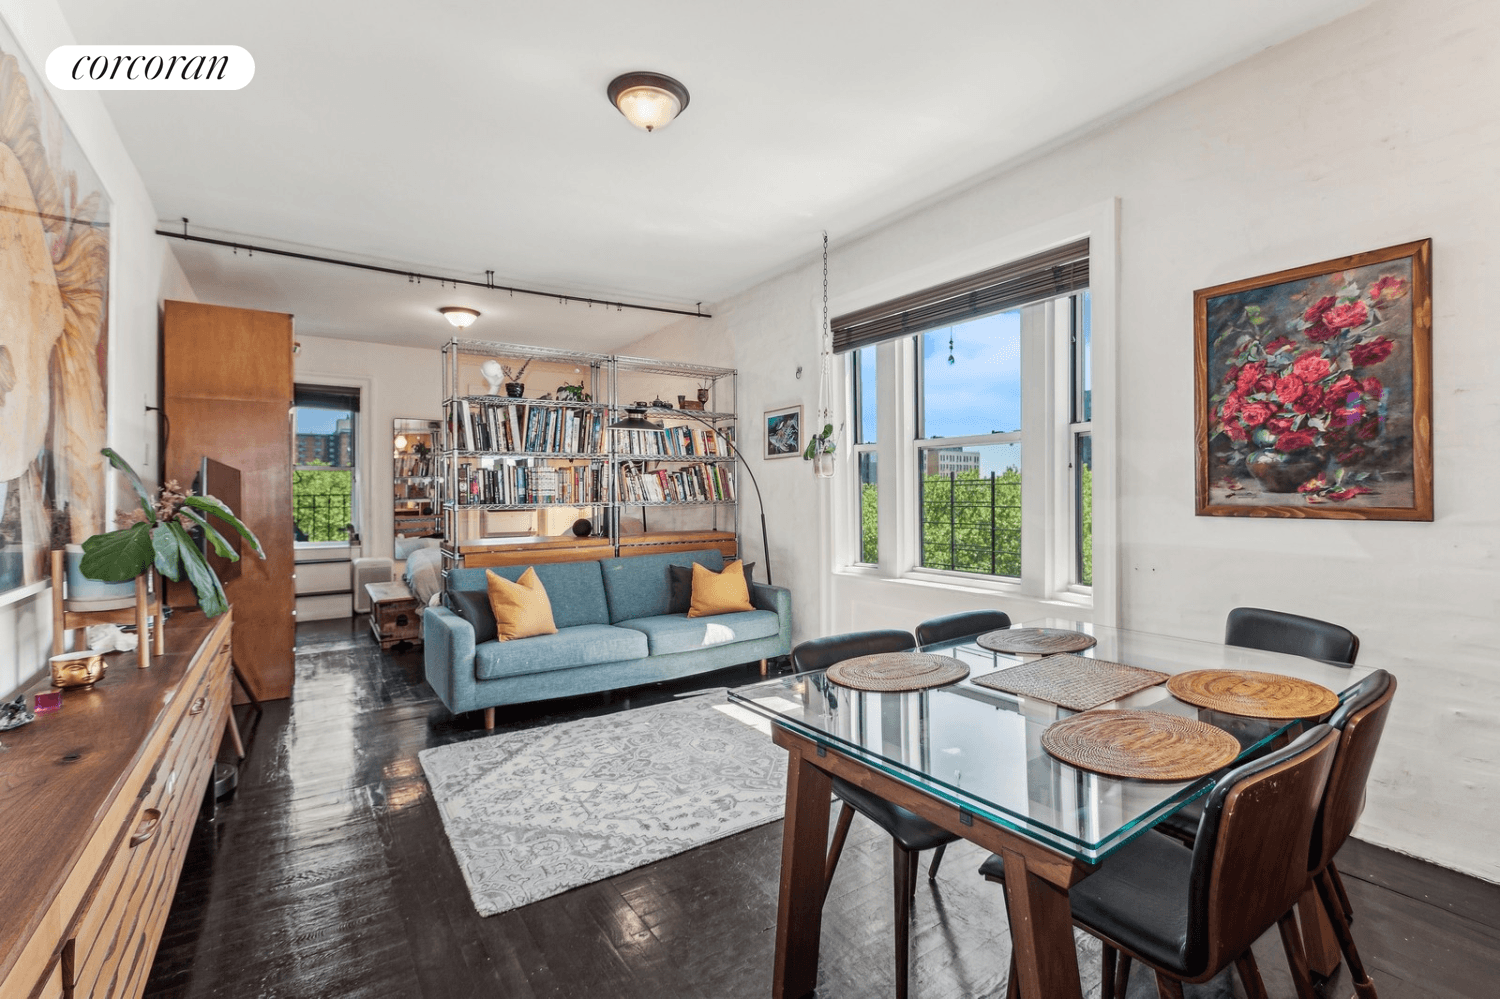 Nestled in a sought after corner of a vibrant neighborhood, this exceptional loft embodies the essence of urban living.